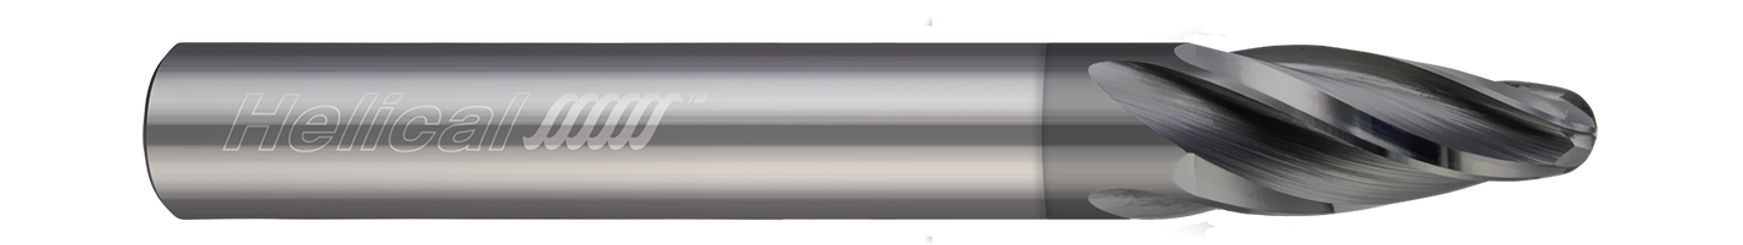 Multi-Axis Finishers-4 Flute-Oval Form (Nplus)